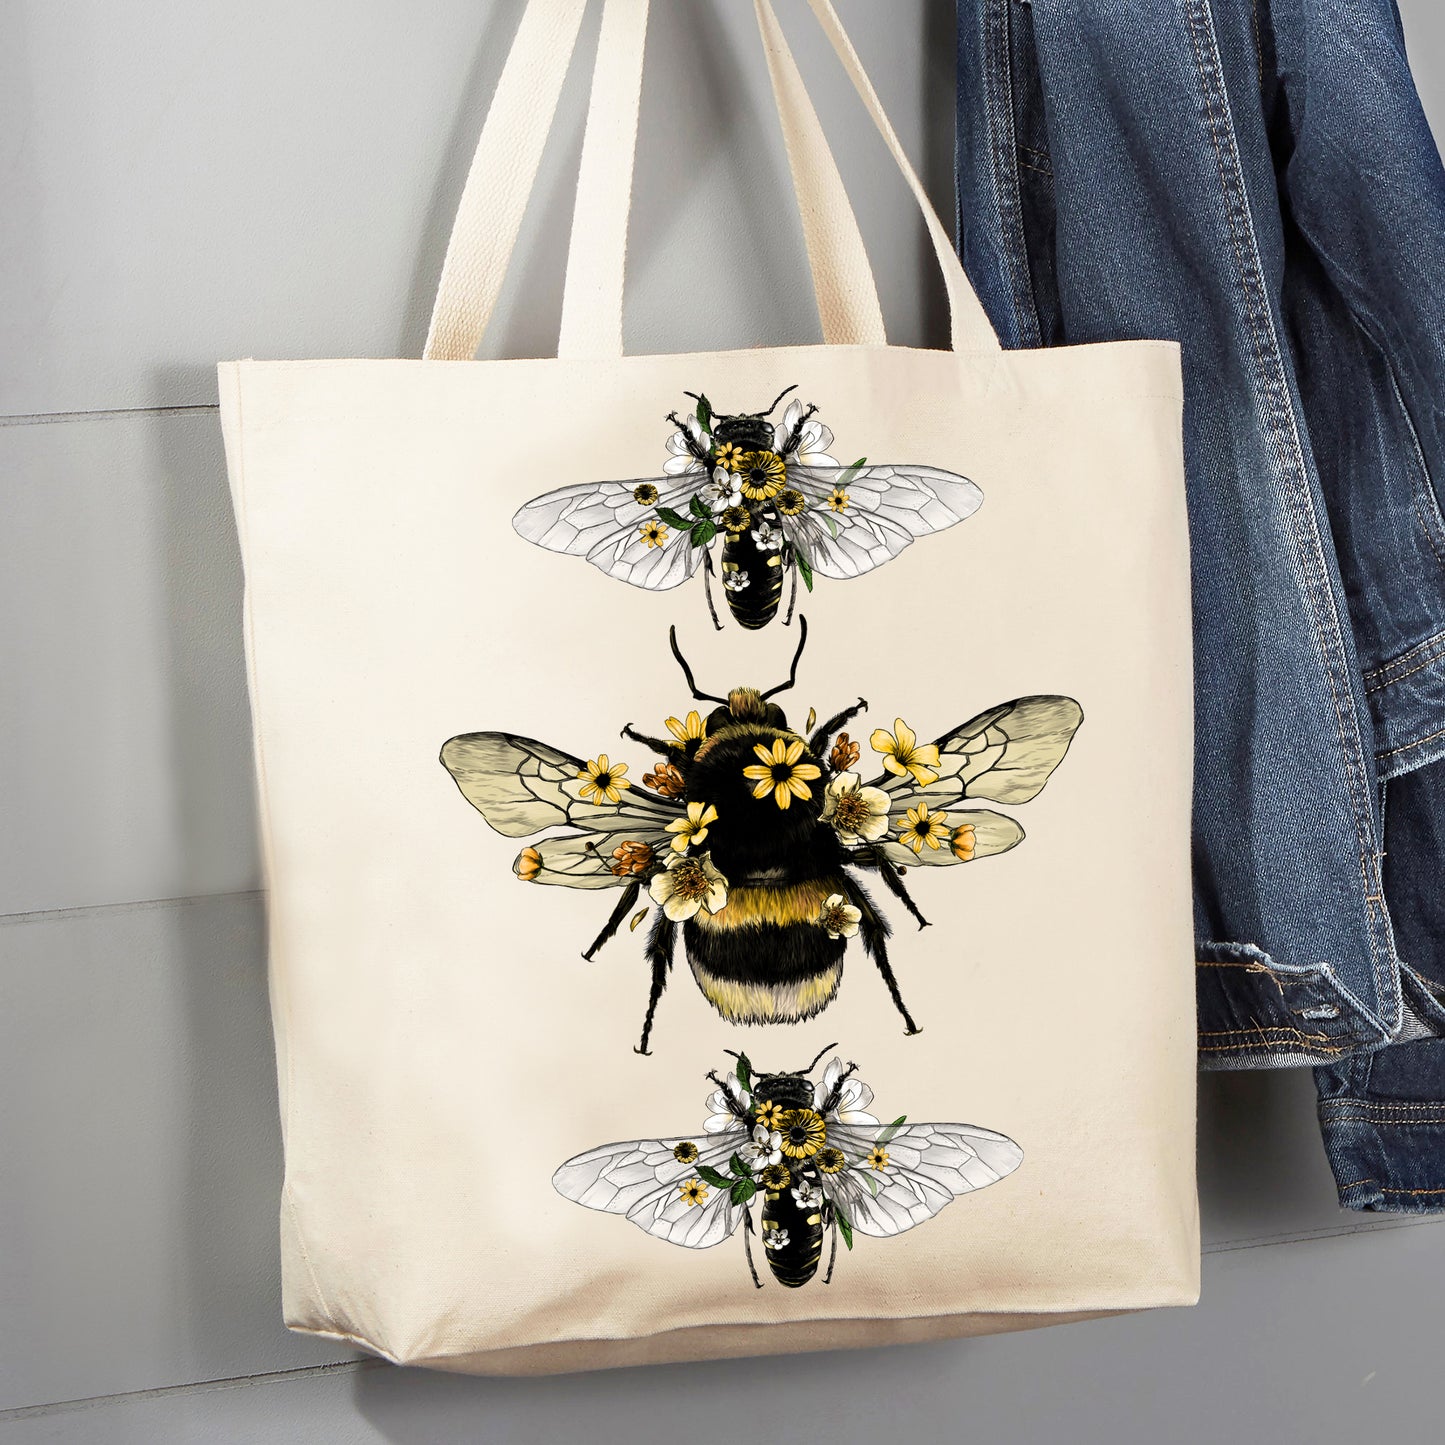 Vintage Bees Flowers Insect 12 oz Canvas Tote Bag